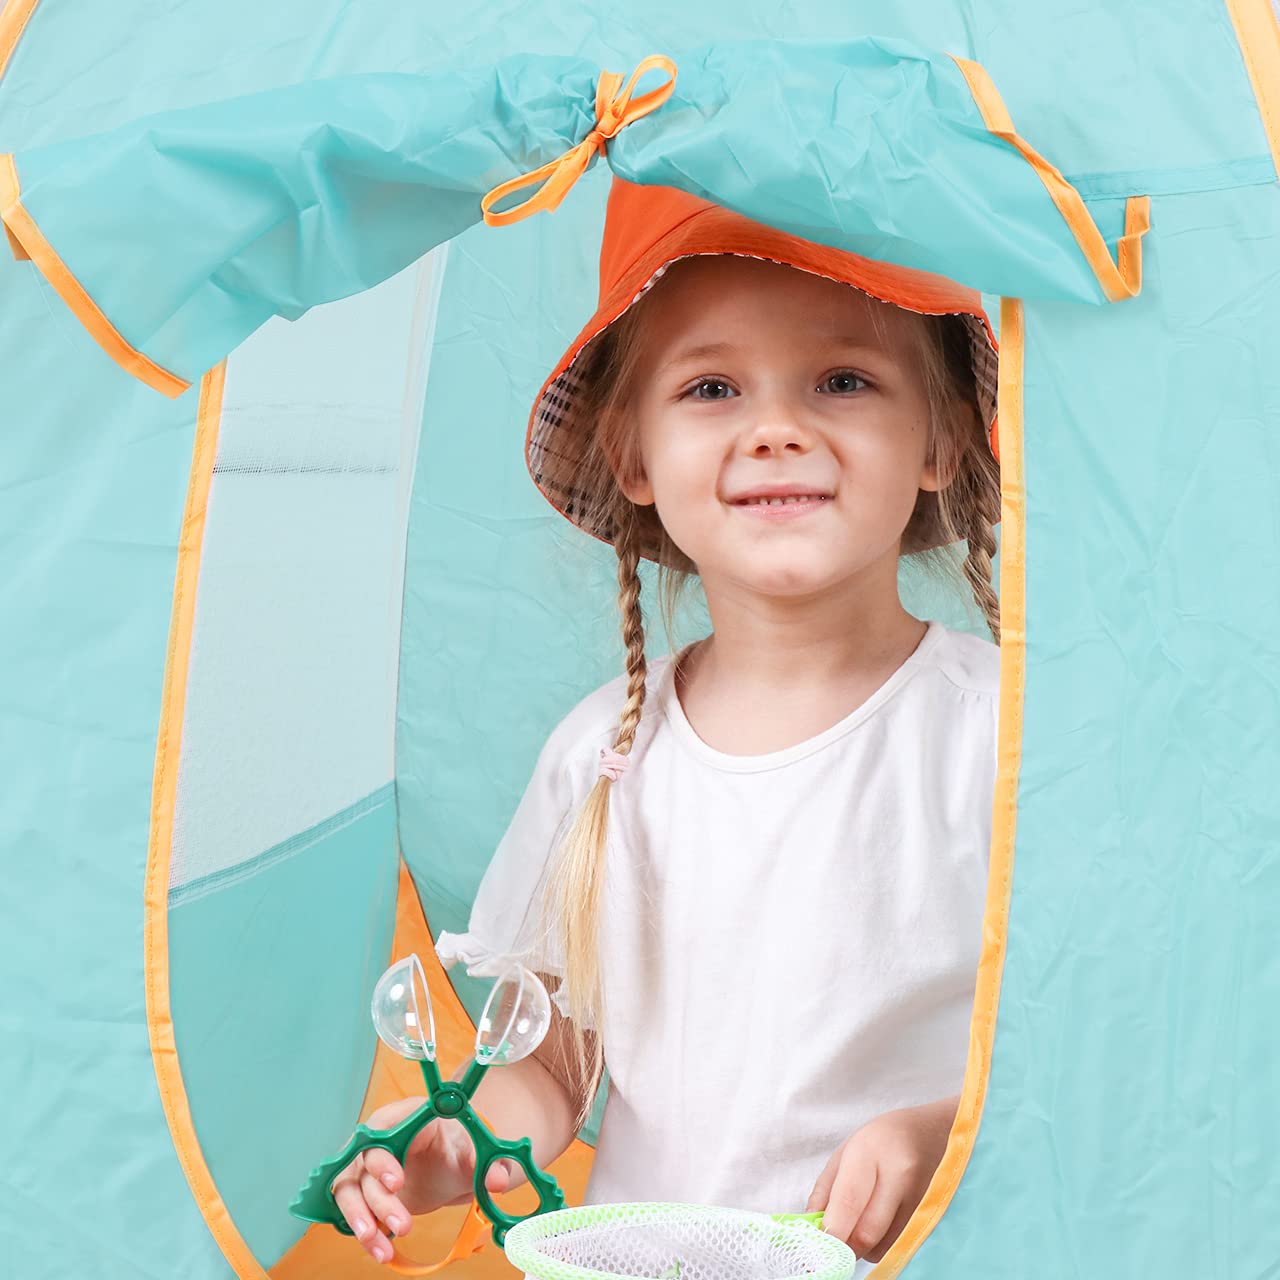 Meland Kids Camping Set with Tent 24pcs - Camping Gear Tool Pretend Play Set for Toddlers Kids Boys Girls Outdoor Toy Birthday Gift